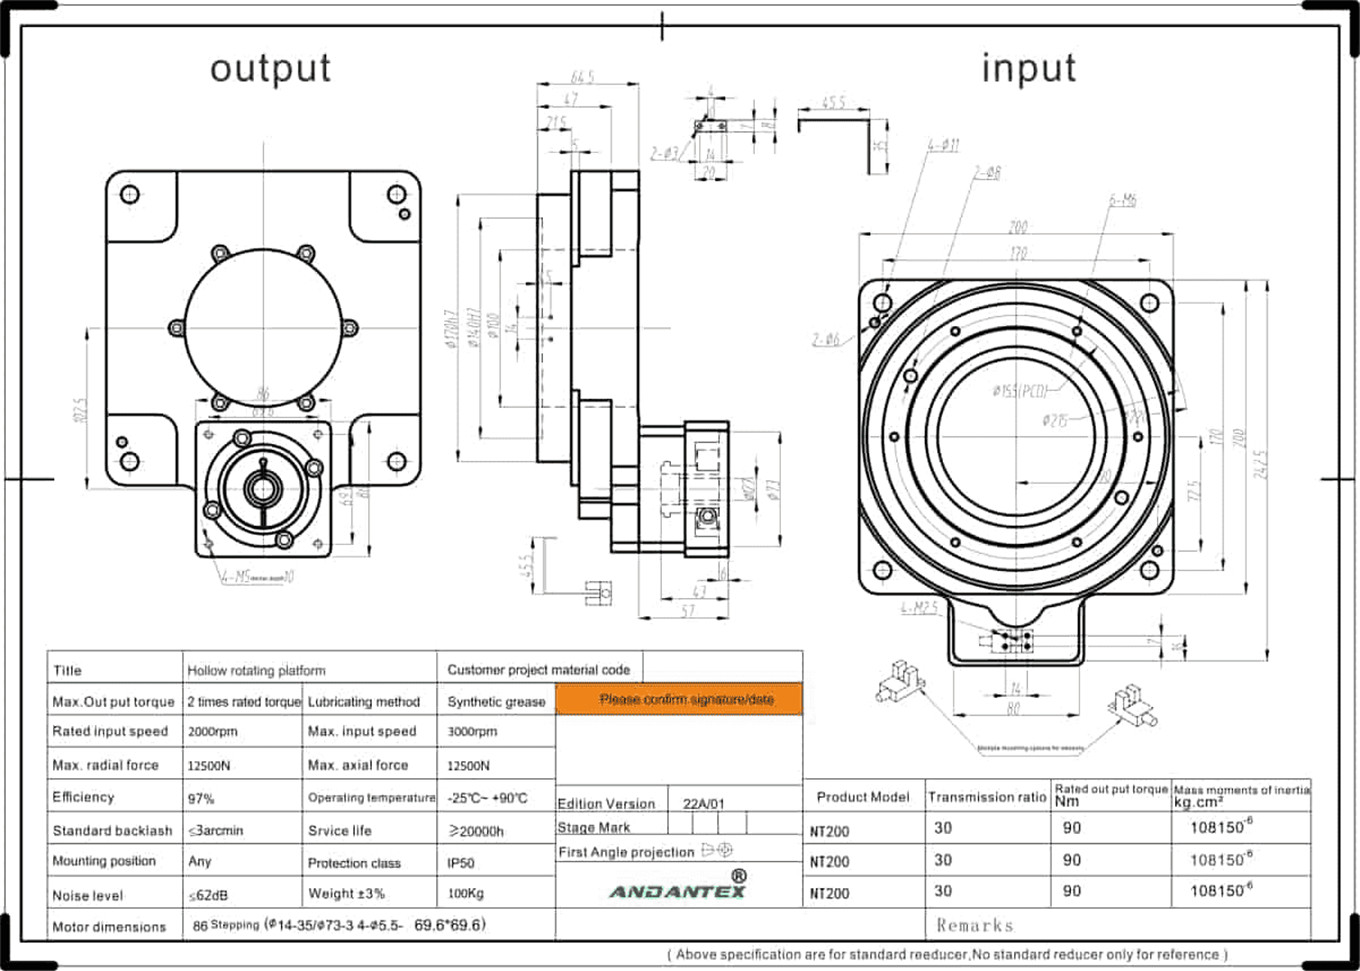 ANDANTEX NT200-10 hollow rotary table in the laser cutting machine auxiliary equipment applications-01